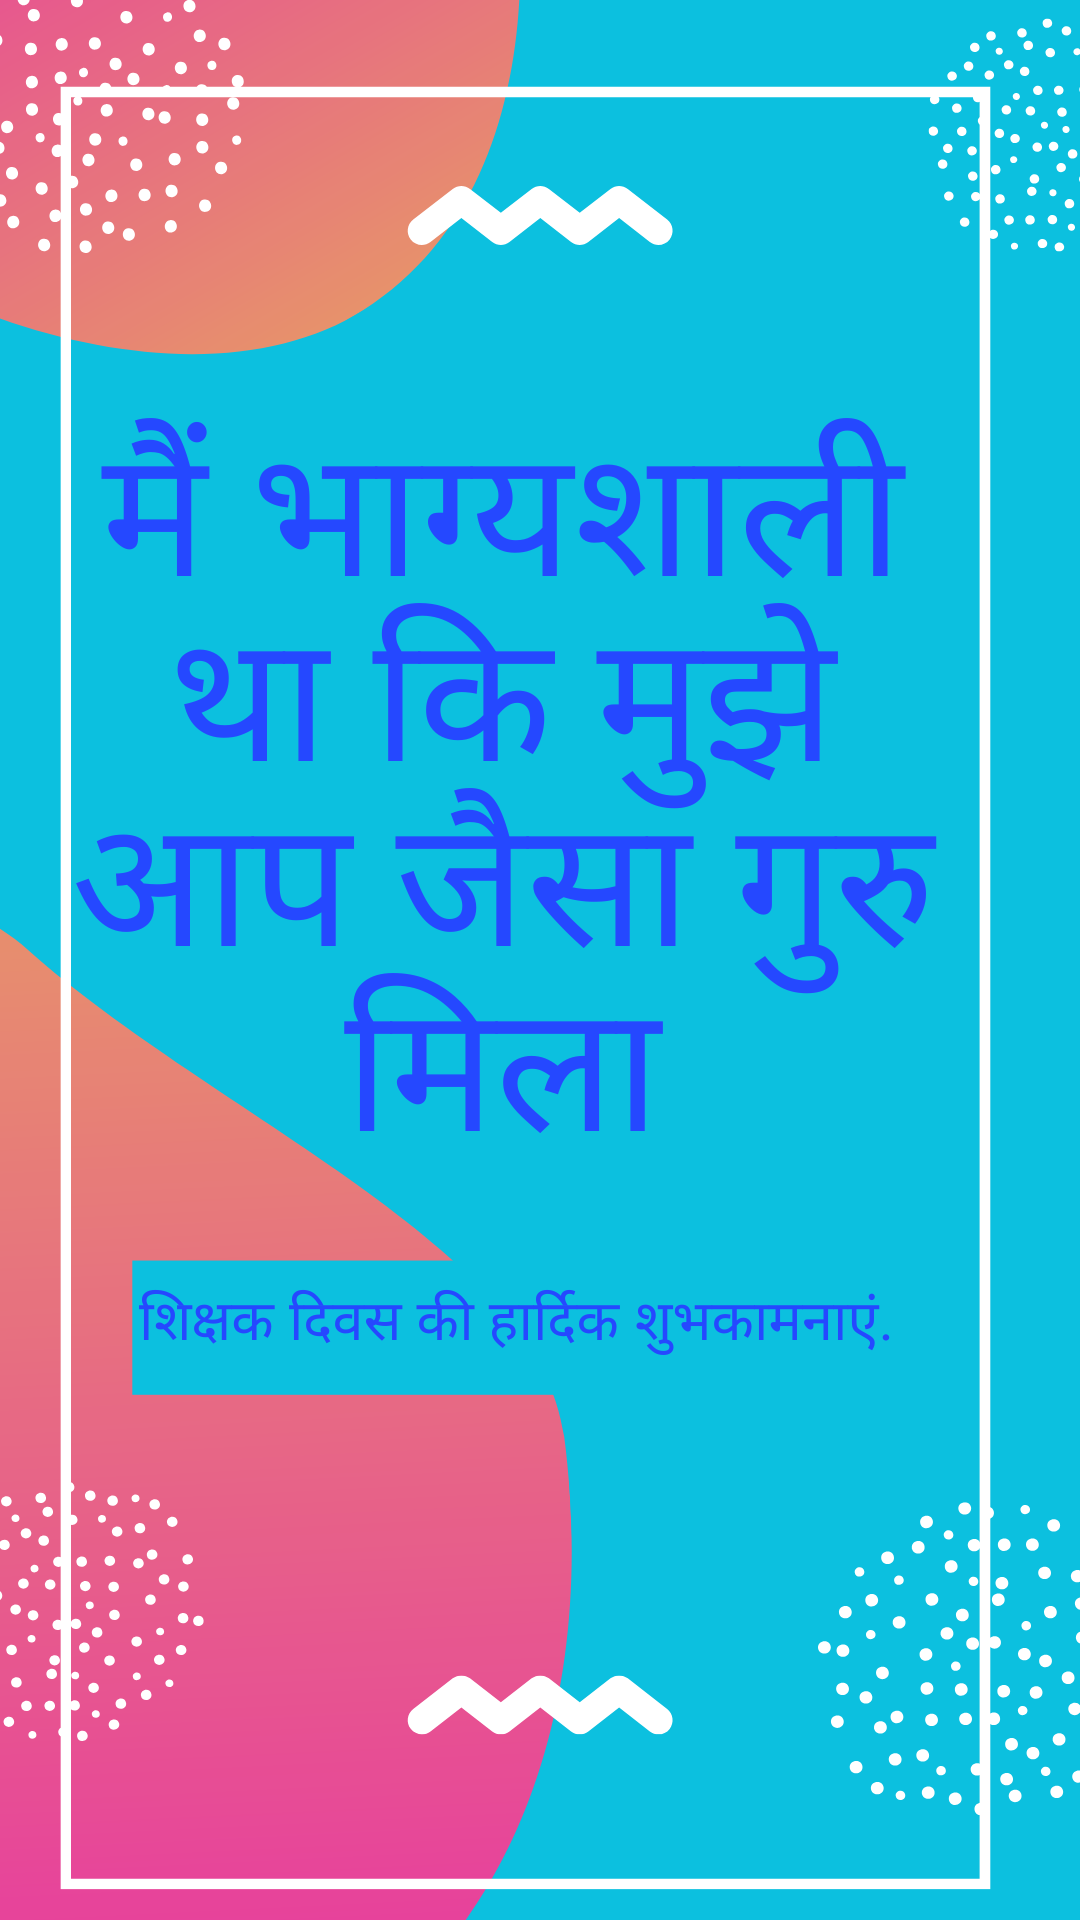 #{"id":2422,"_id":null,"name":"teachers-day-hindi","count":0,"data":null,"deleted_at":null,"created_at":"2023-08-29T12:02:01.000000Z","updated_at":"2023-08-30T07:09:07.000000Z","merge_with":null,"pivot":{"taggable_id":2247,"tag_id":2422,"taggable_type":"App\\Models\\Status"}}, #{"id":2411,"_id":null,"name":"teacherquotes","count":0,"data":null,"deleted_at":null,"created_at":"2023-08-29T12:02:00.000000Z","updated_at":"2023-08-29T12:02:00.000000Z","merge_with":null,"pivot":{"taggable_id":2247,"tag_id":2411,"taggable_type":"App\\Models\\Status"}}, #{"id":2424,"_id":null,"name":"teachers-day-hindi-status","count":0,"data":null,"deleted_at":null,"created_at":"2023-08-29T12:02:01.000000Z","updated_at":"2023-08-30T07:08:47.000000Z","merge_with":null,"pivot":{"taggable_id":2247,"tag_id":2424,"taggable_type":"App\\Models\\Status"}}, #{"id":2404,"_id":null,"name":"happyteachersdaystatus","count":0,"data":null,"deleted_at":null,"created_at":"2023-08-29T12:02:00.000000Z","updated_at":"2023-08-29T12:02:00.000000Z","merge_with":null,"pivot":{"taggable_id":2247,"tag_id":2404,"taggable_type":"App\\Models\\Status"}}, #{"id":2405,"_id":null,"name":"thankyouteachers","count":0,"data":null,"deleted_at":null,"created_at":"2023-08-29T12:02:00.000000Z","updated_at":"2023-08-29T12:02:00.000000Z","merge_with":null,"pivot":{"taggable_id":2247,"tag_id":2405,"taggable_type":"App\\Models\\Status"}}